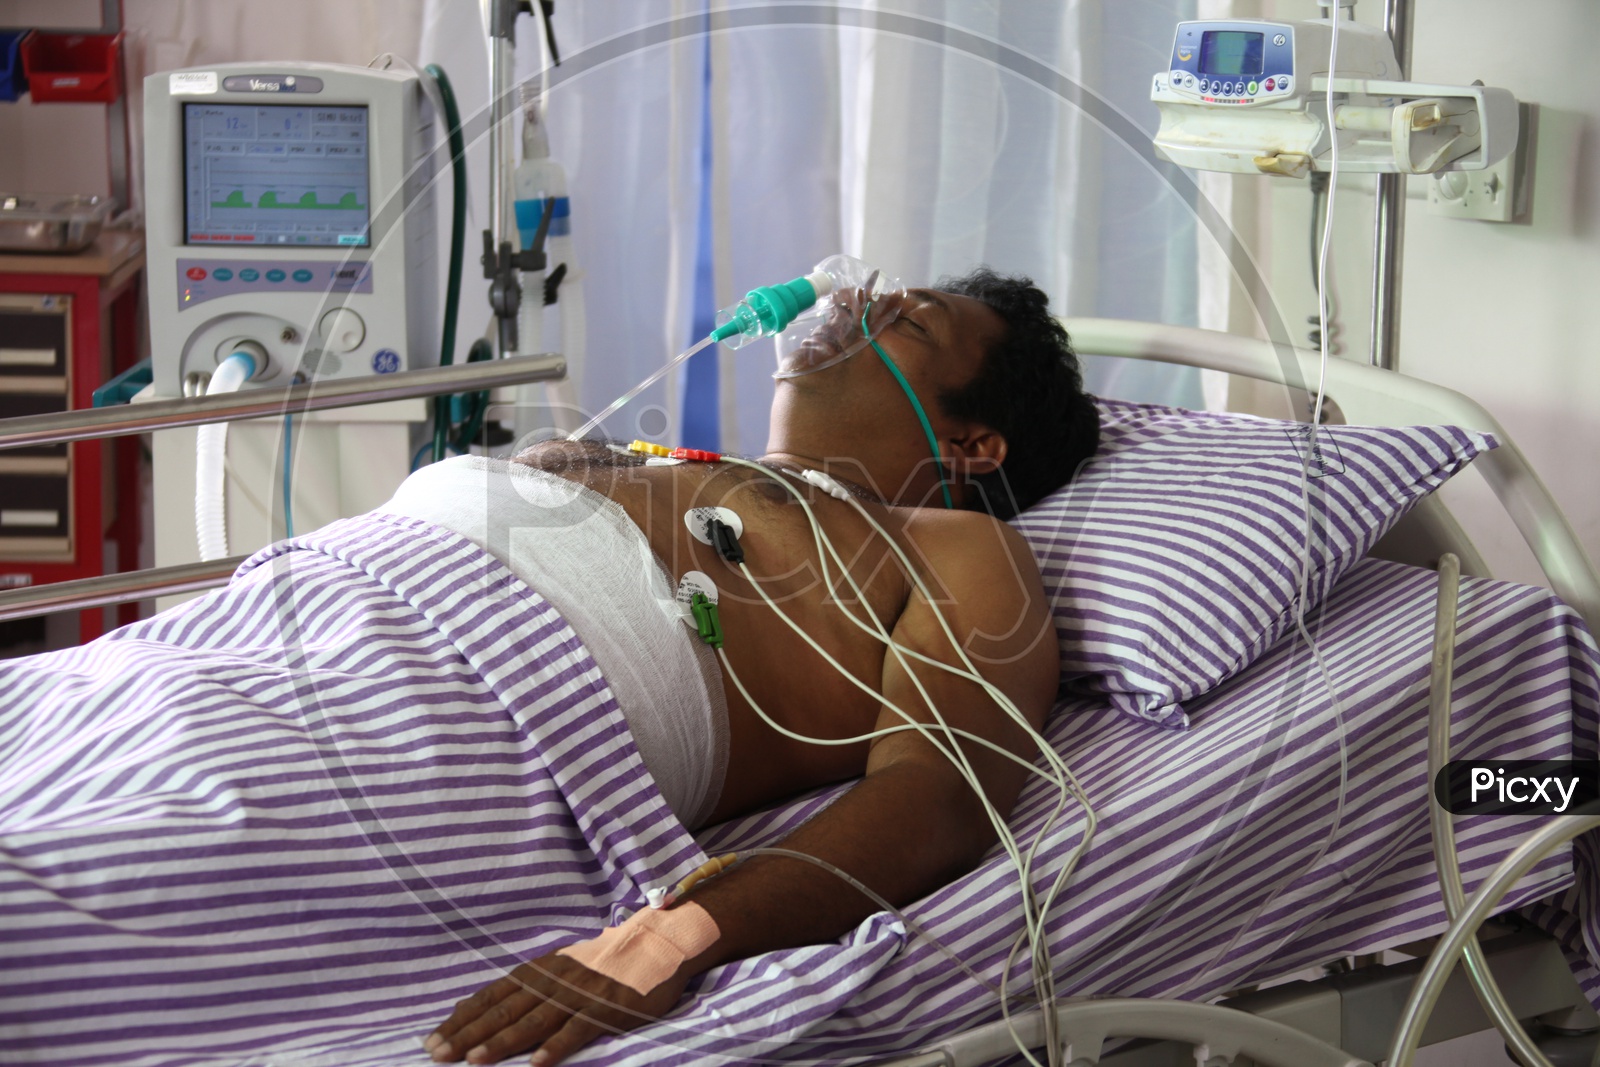 A Man On Life Support System on a Hospital Bed